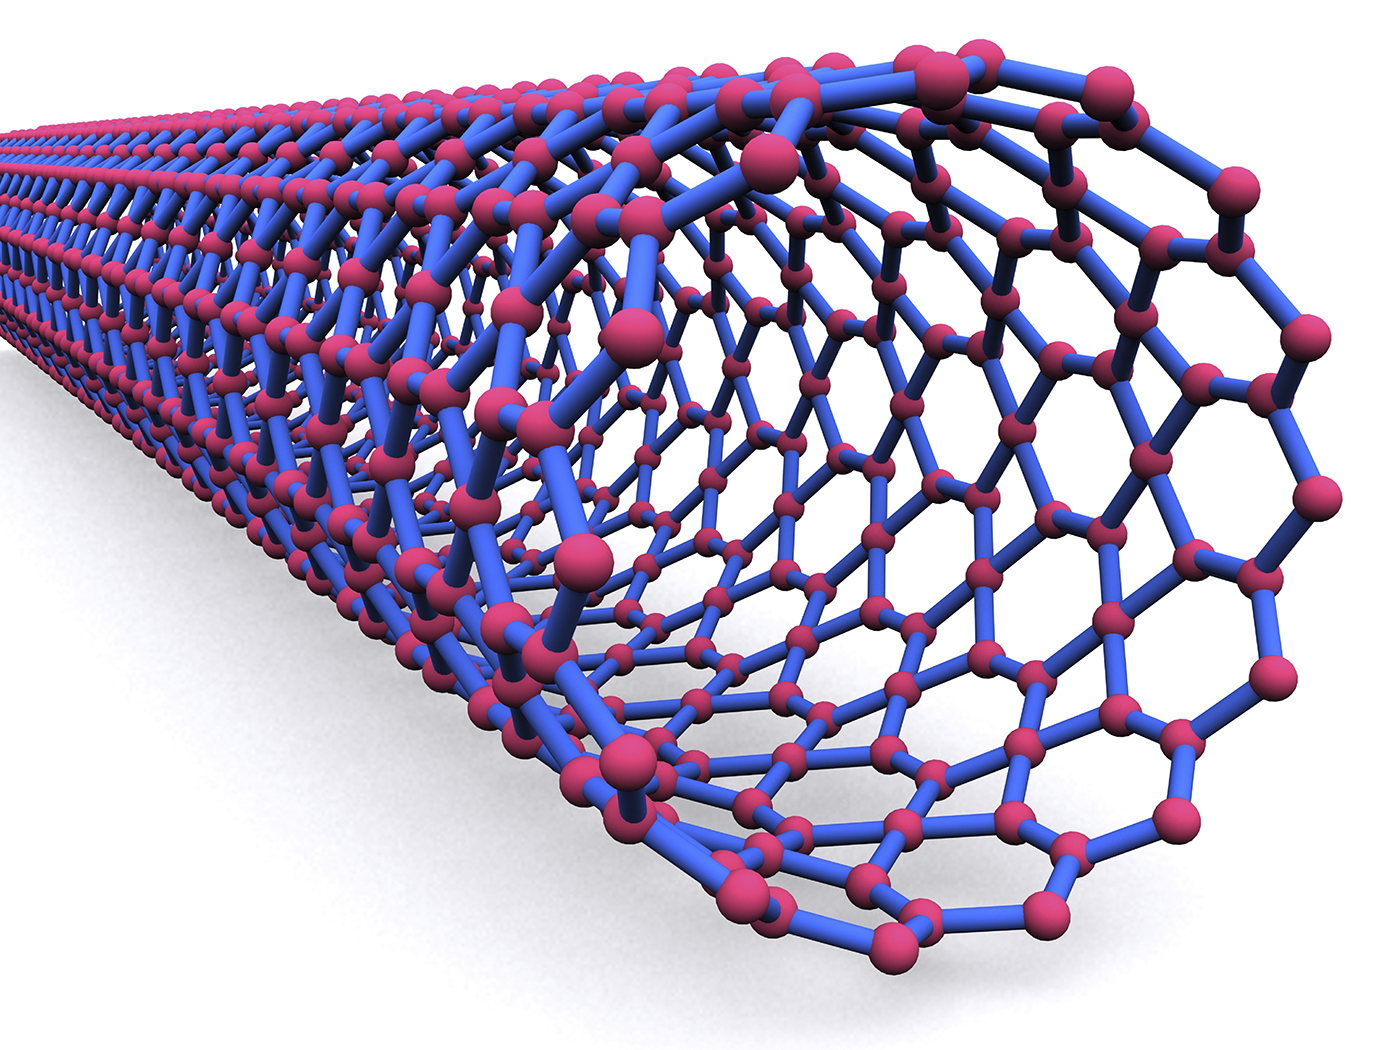 Single Walled Carbon Nanotube (SWCNT)